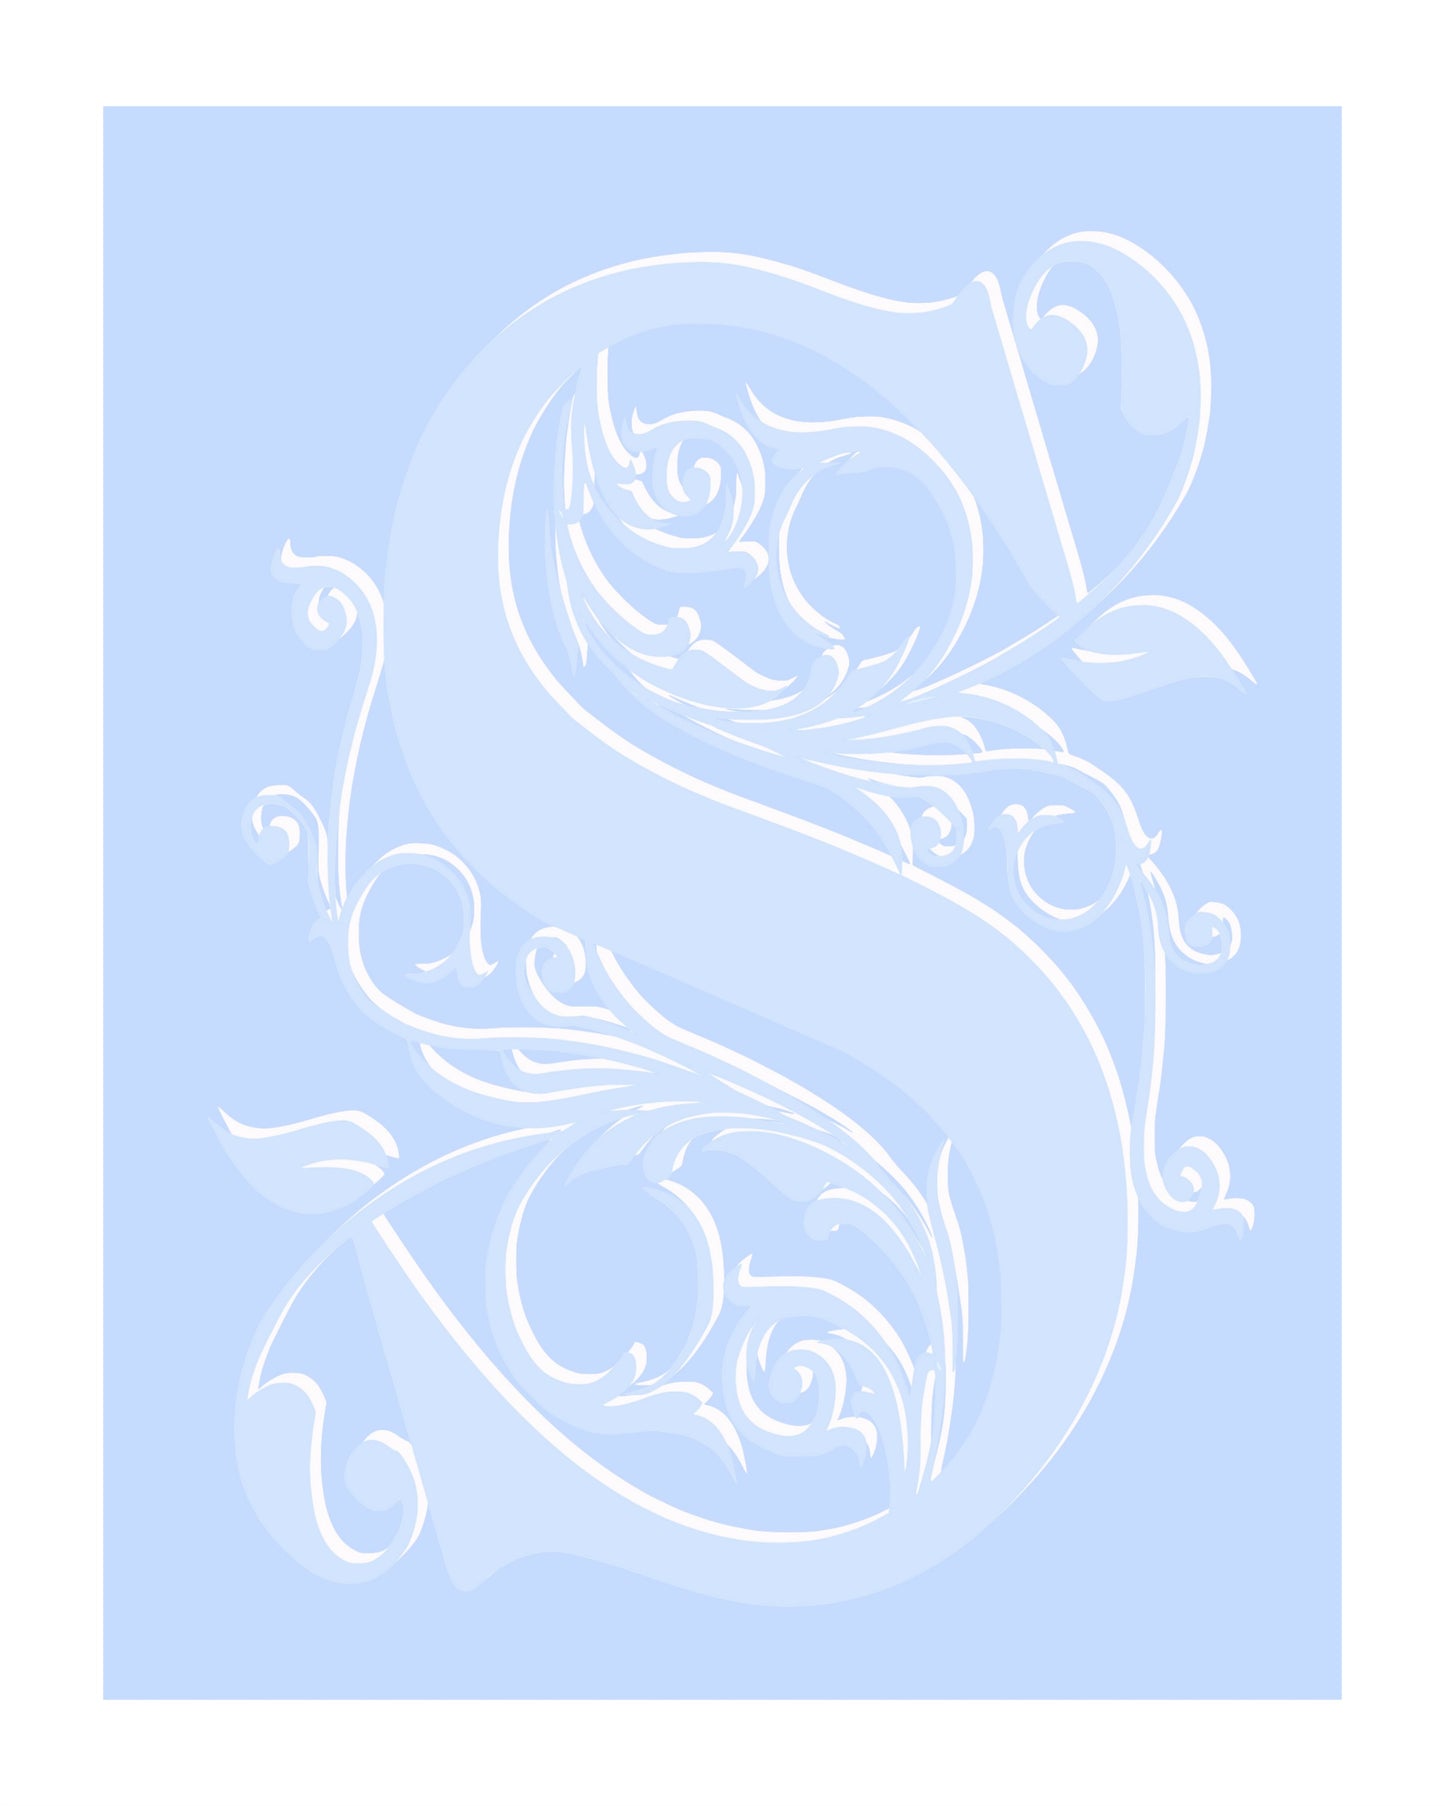 Blue S Monogram on Blue Background 8X10 Print "S" Initial Ready to frame